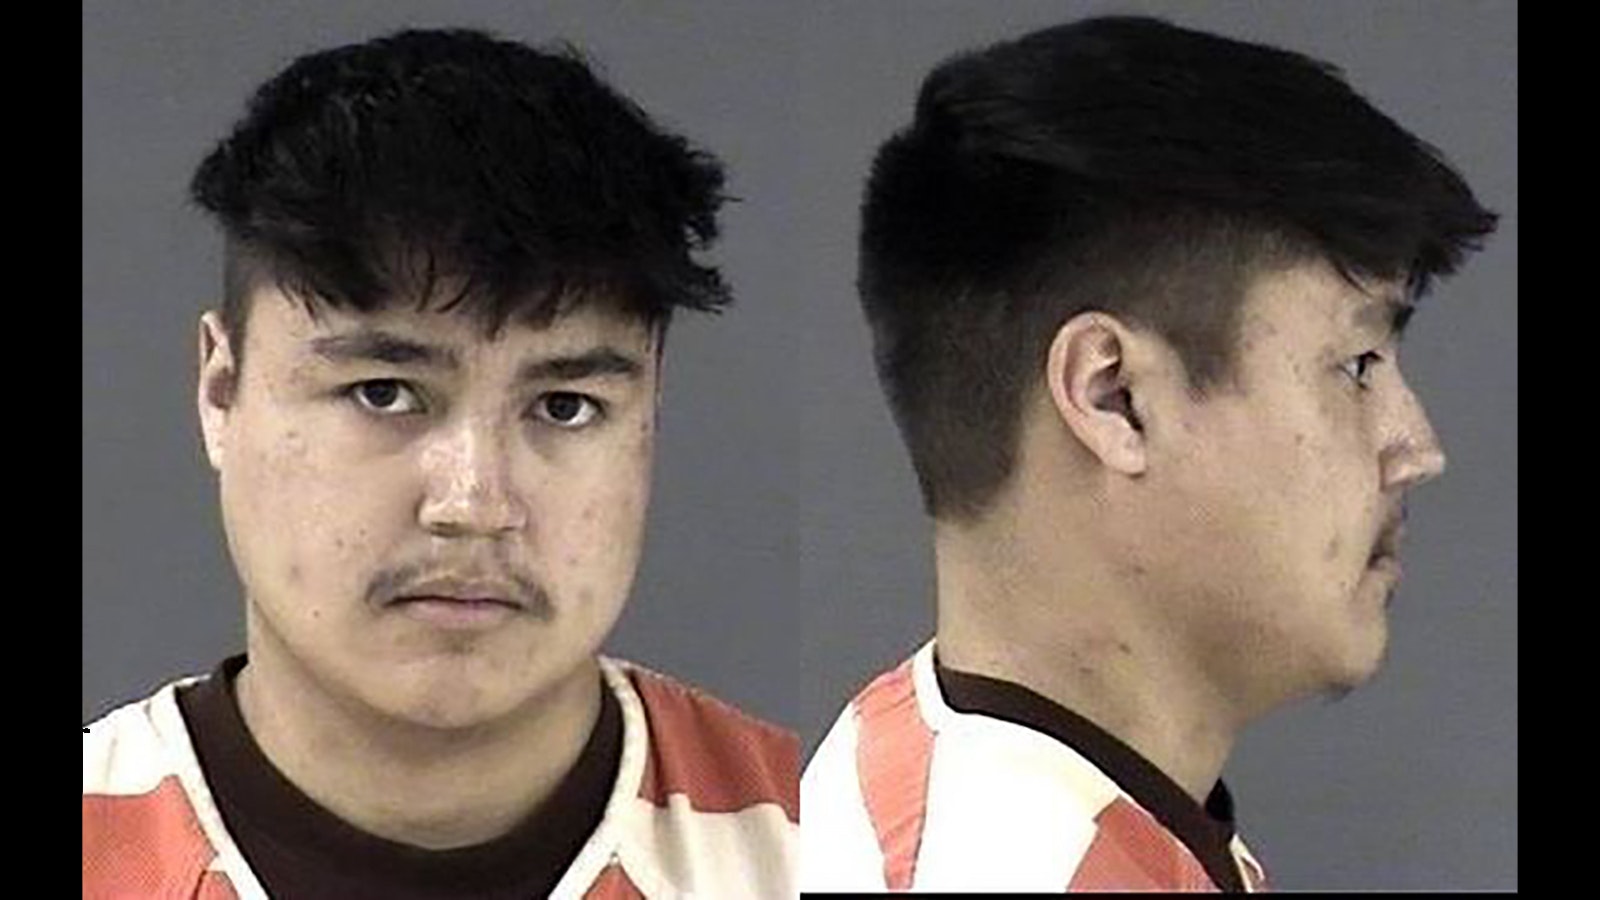 Tirso Munguia, 19, has agreed to plead guilty in the accidental shooting death of a 16-year-old Cheyenne girl in January.